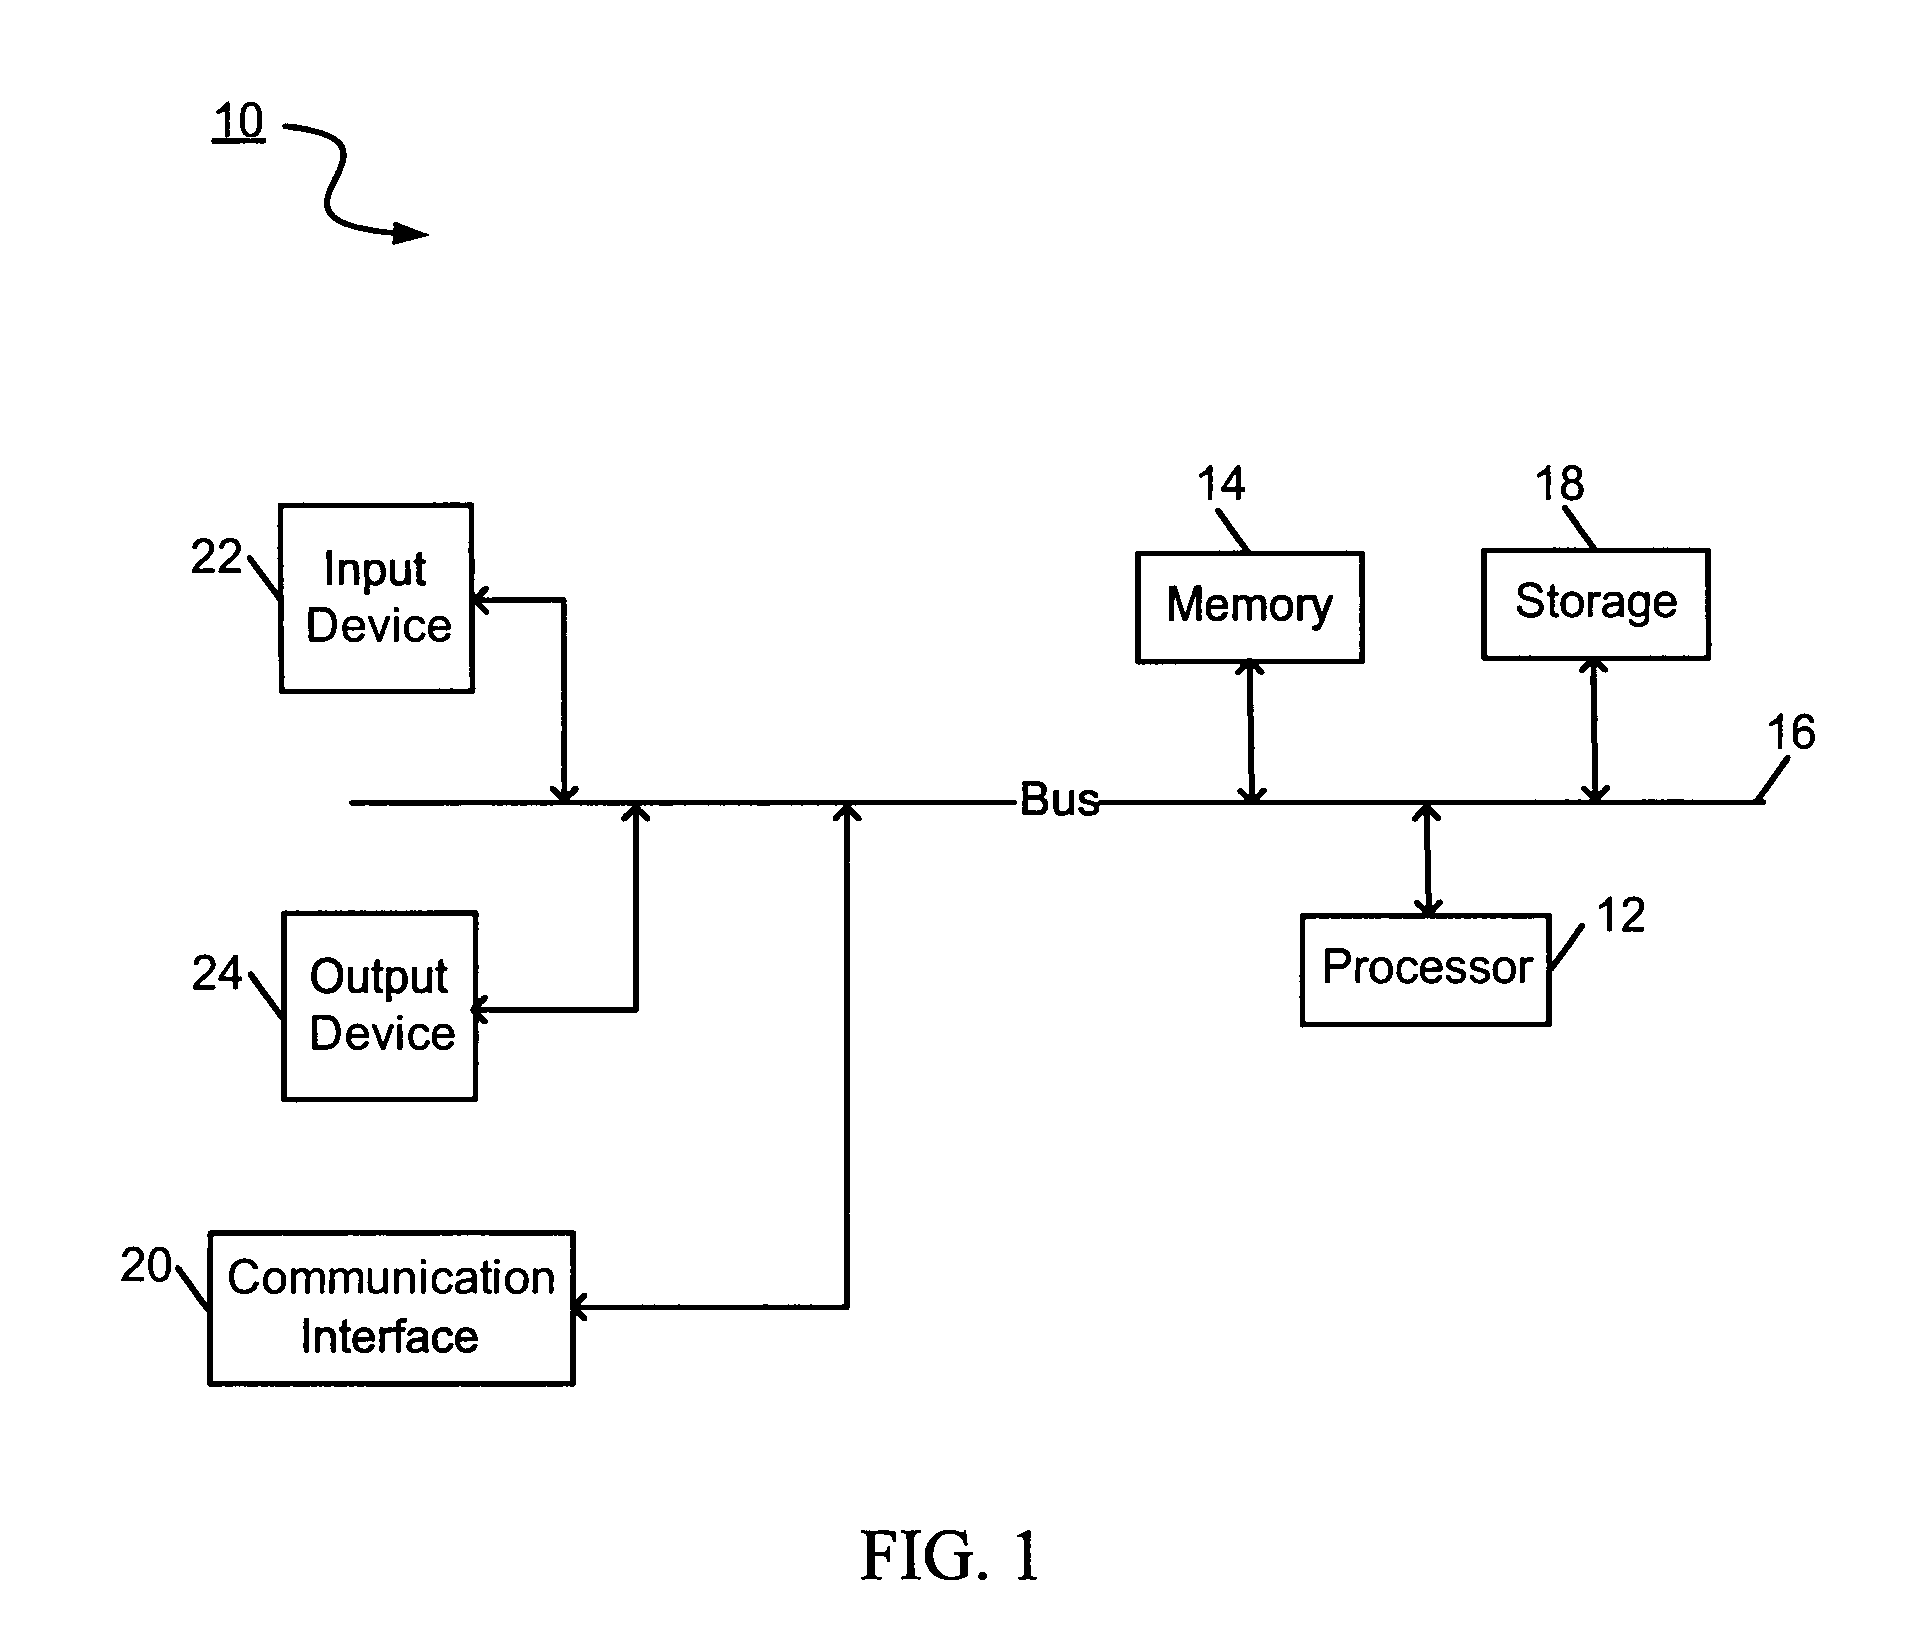 Apparatus, methods and systems for discounted referral and recommendation of electronic content